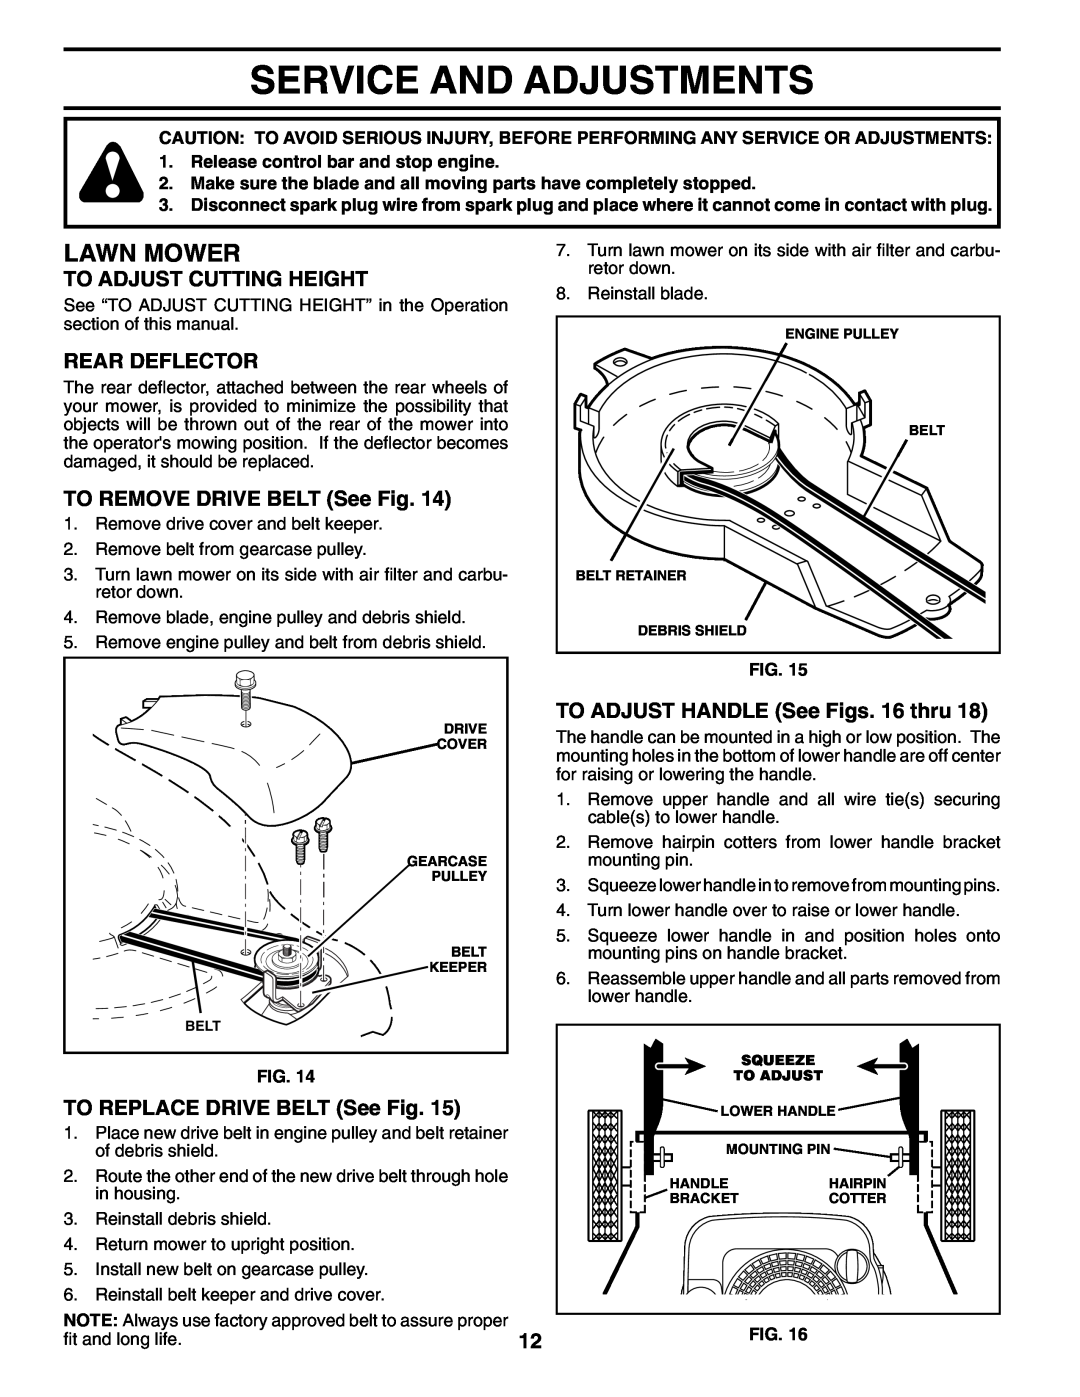 Husqvarna 65021ES Service And Adjustments, To Adjust Cutting Height, Rear Deflector, TO REMOVE DRIVE BELT See Fig 